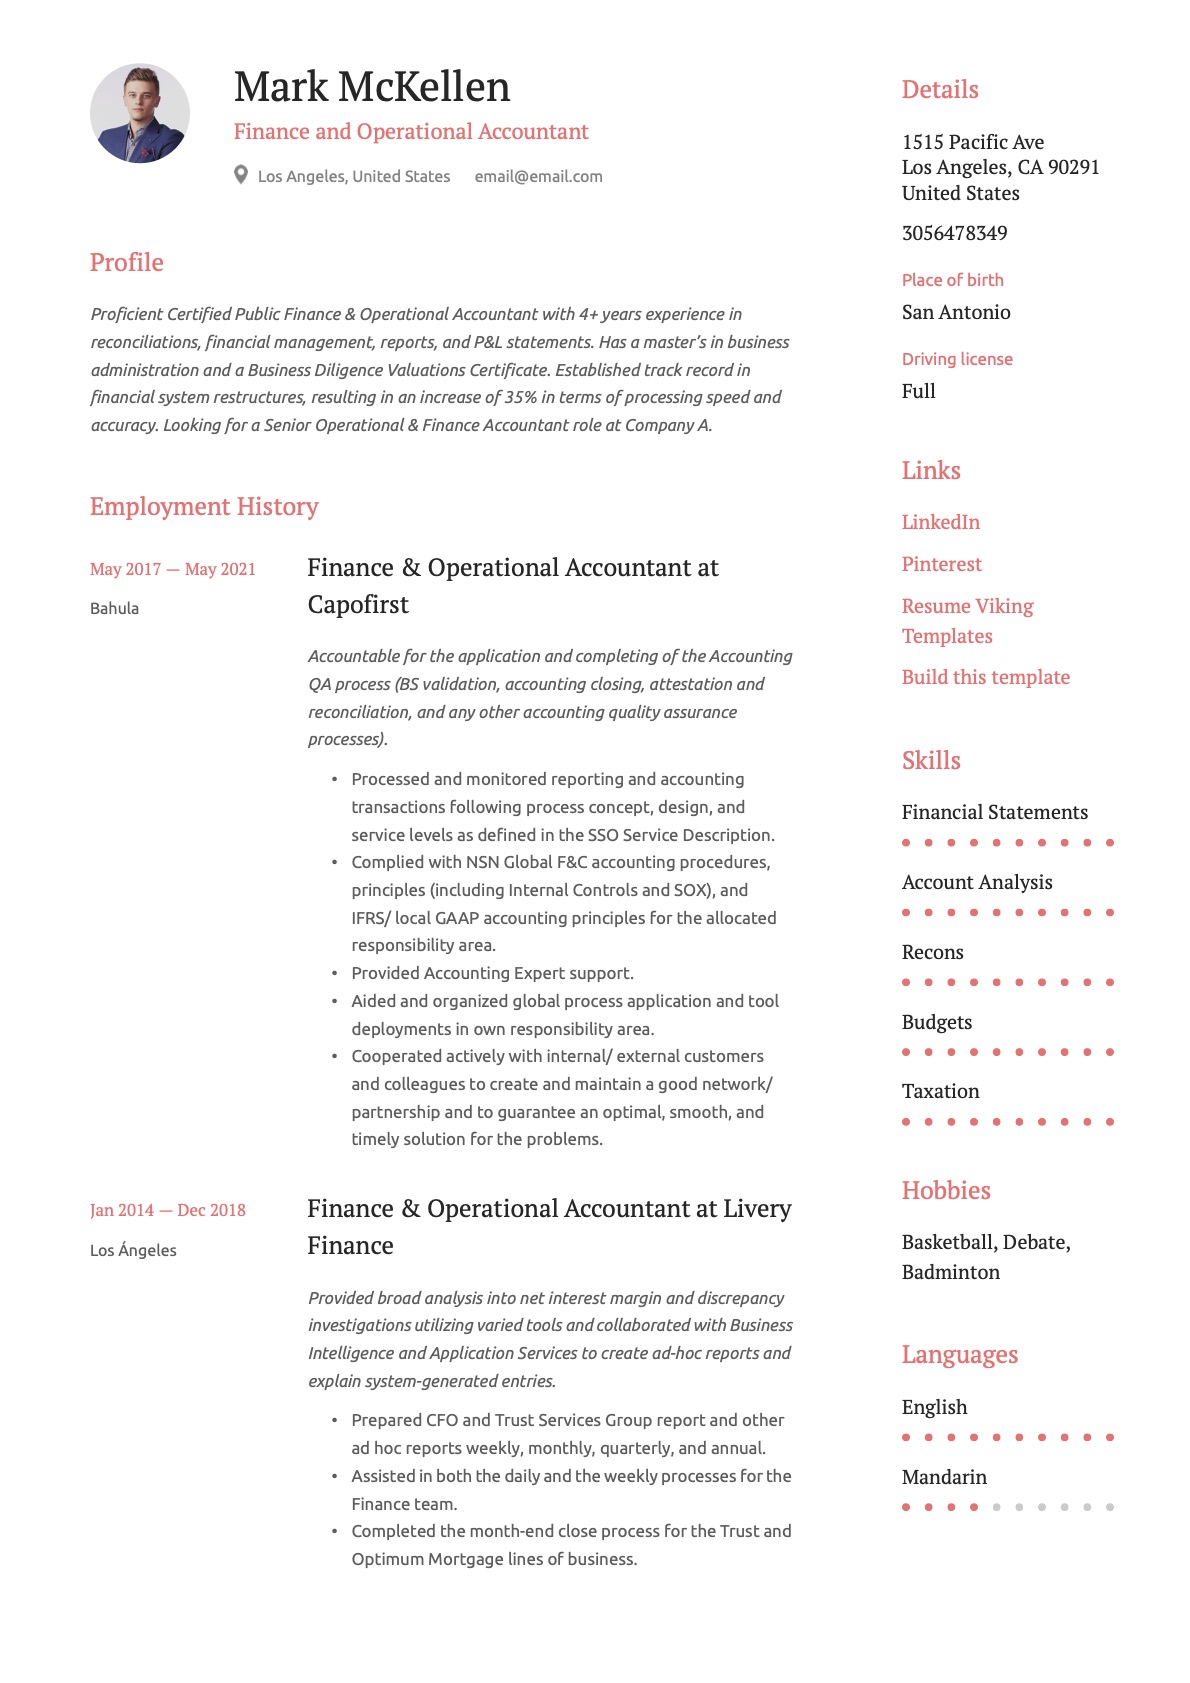 Simple Finance & Operational Accountant Resume Example